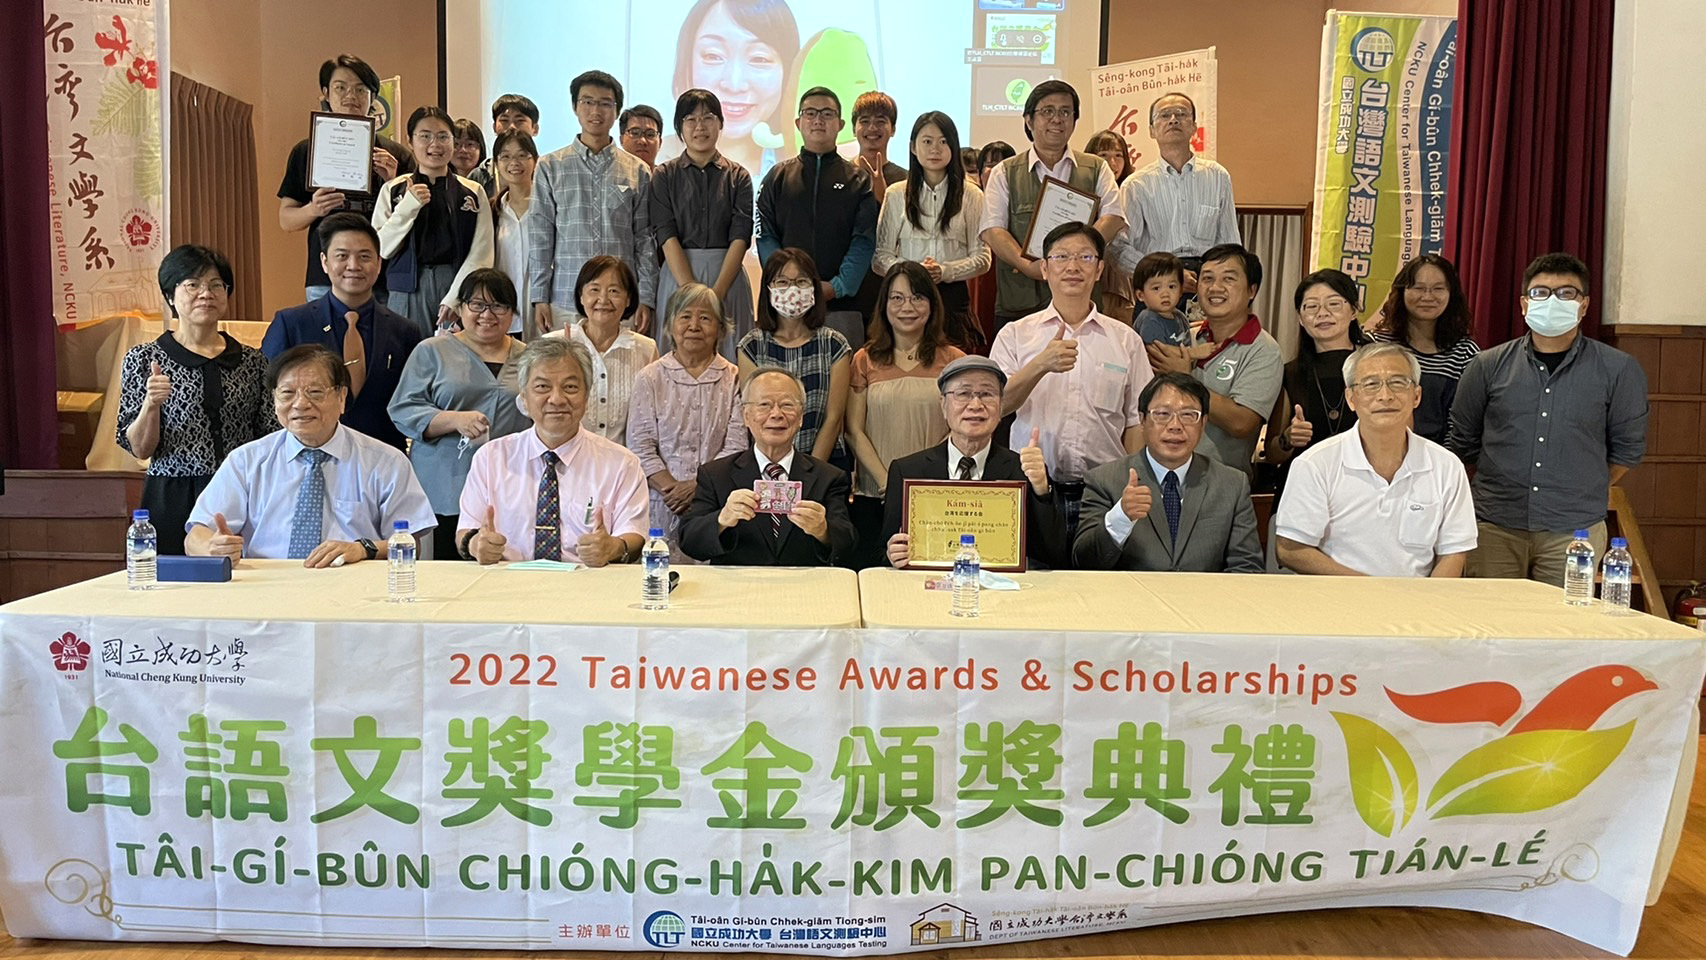 National Cheng Kung University's Million Dollar Award for the Preservation of Taiwanese Language and Culture